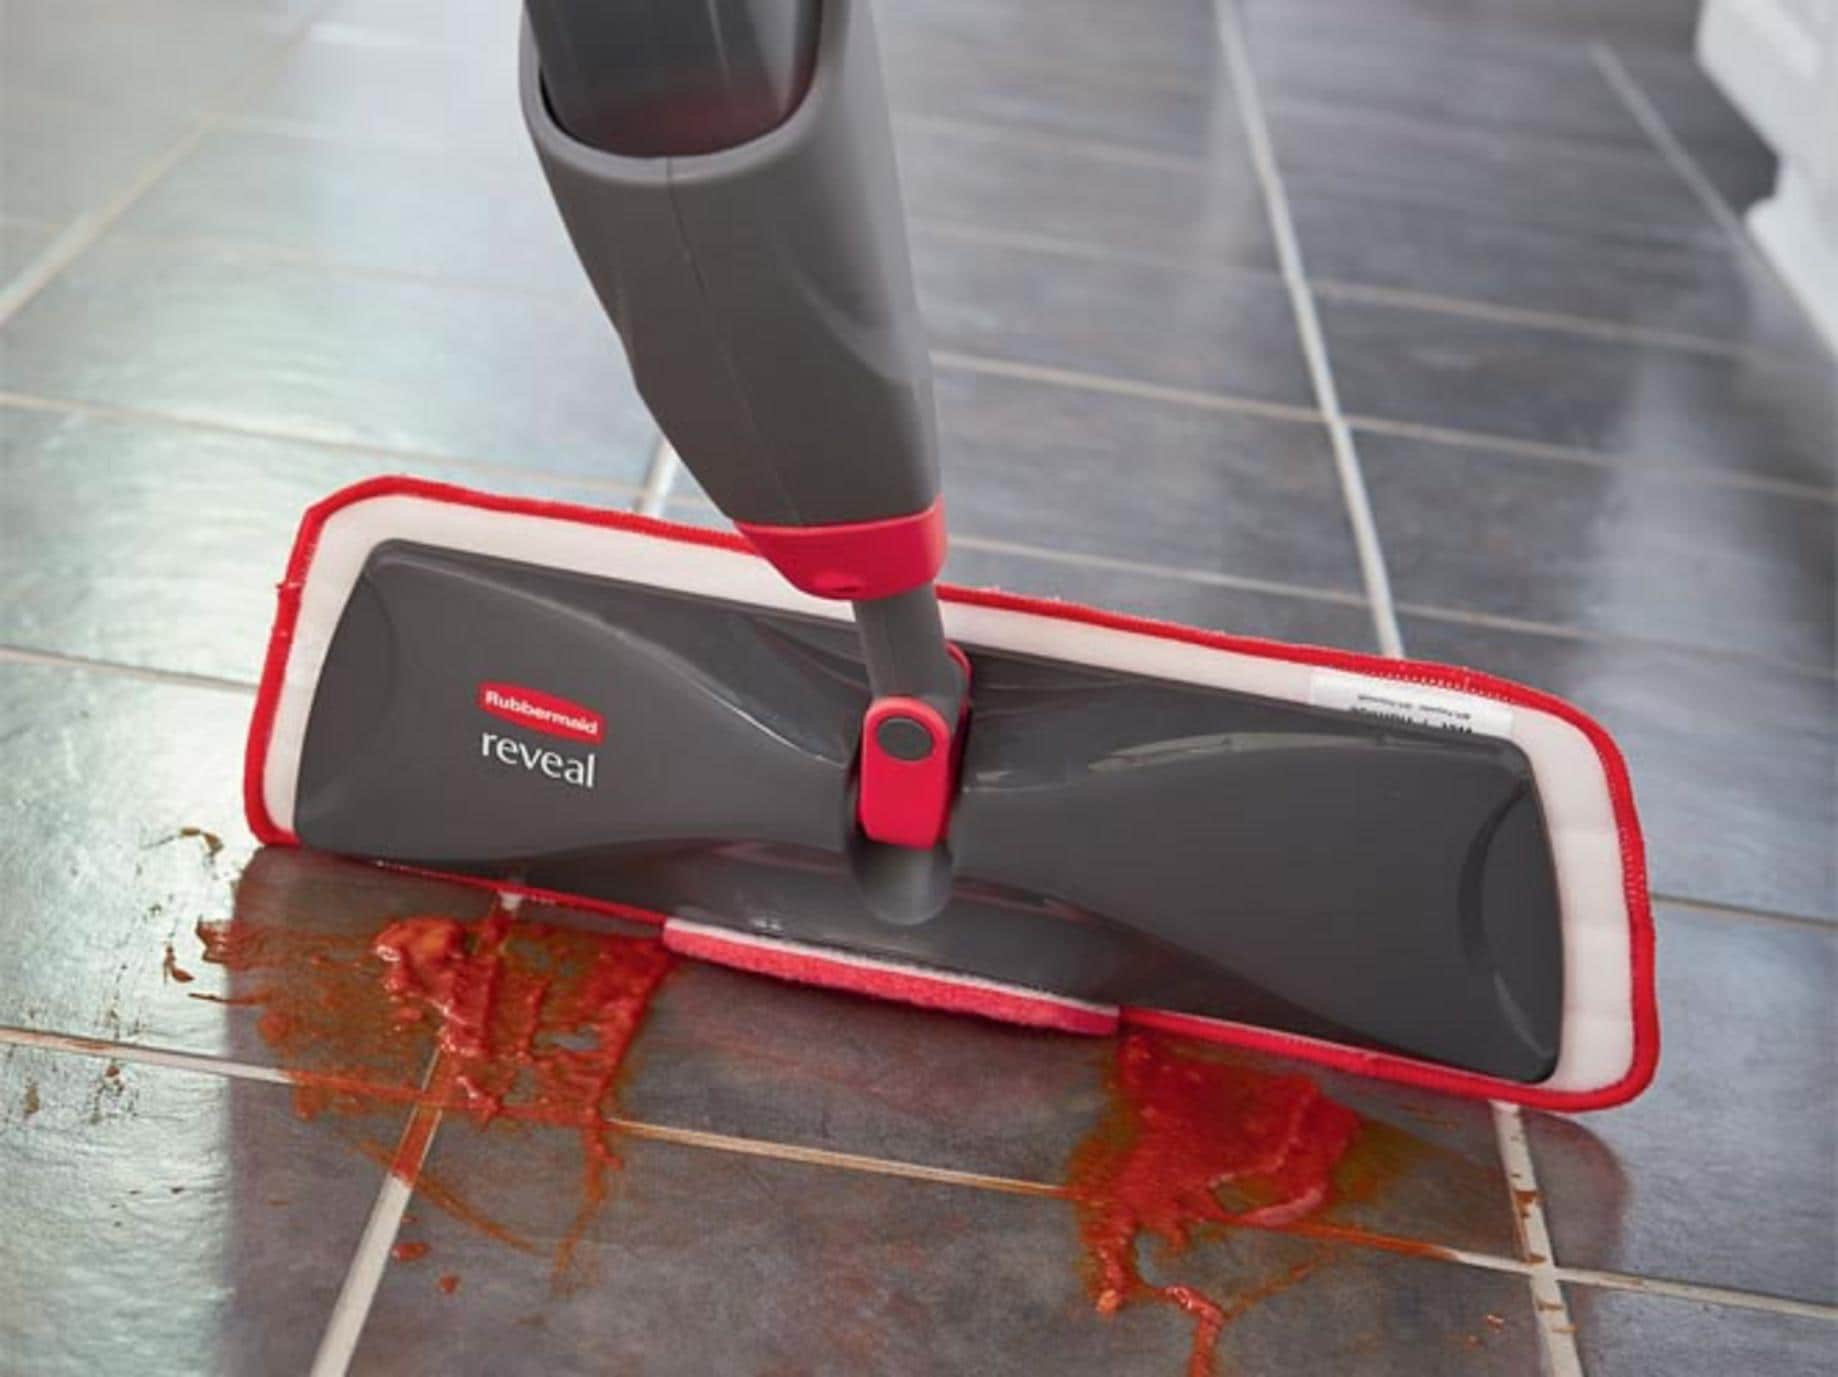 Reveal Spray Mop By Rubbermaid Review - Farmer's Wife Rambles